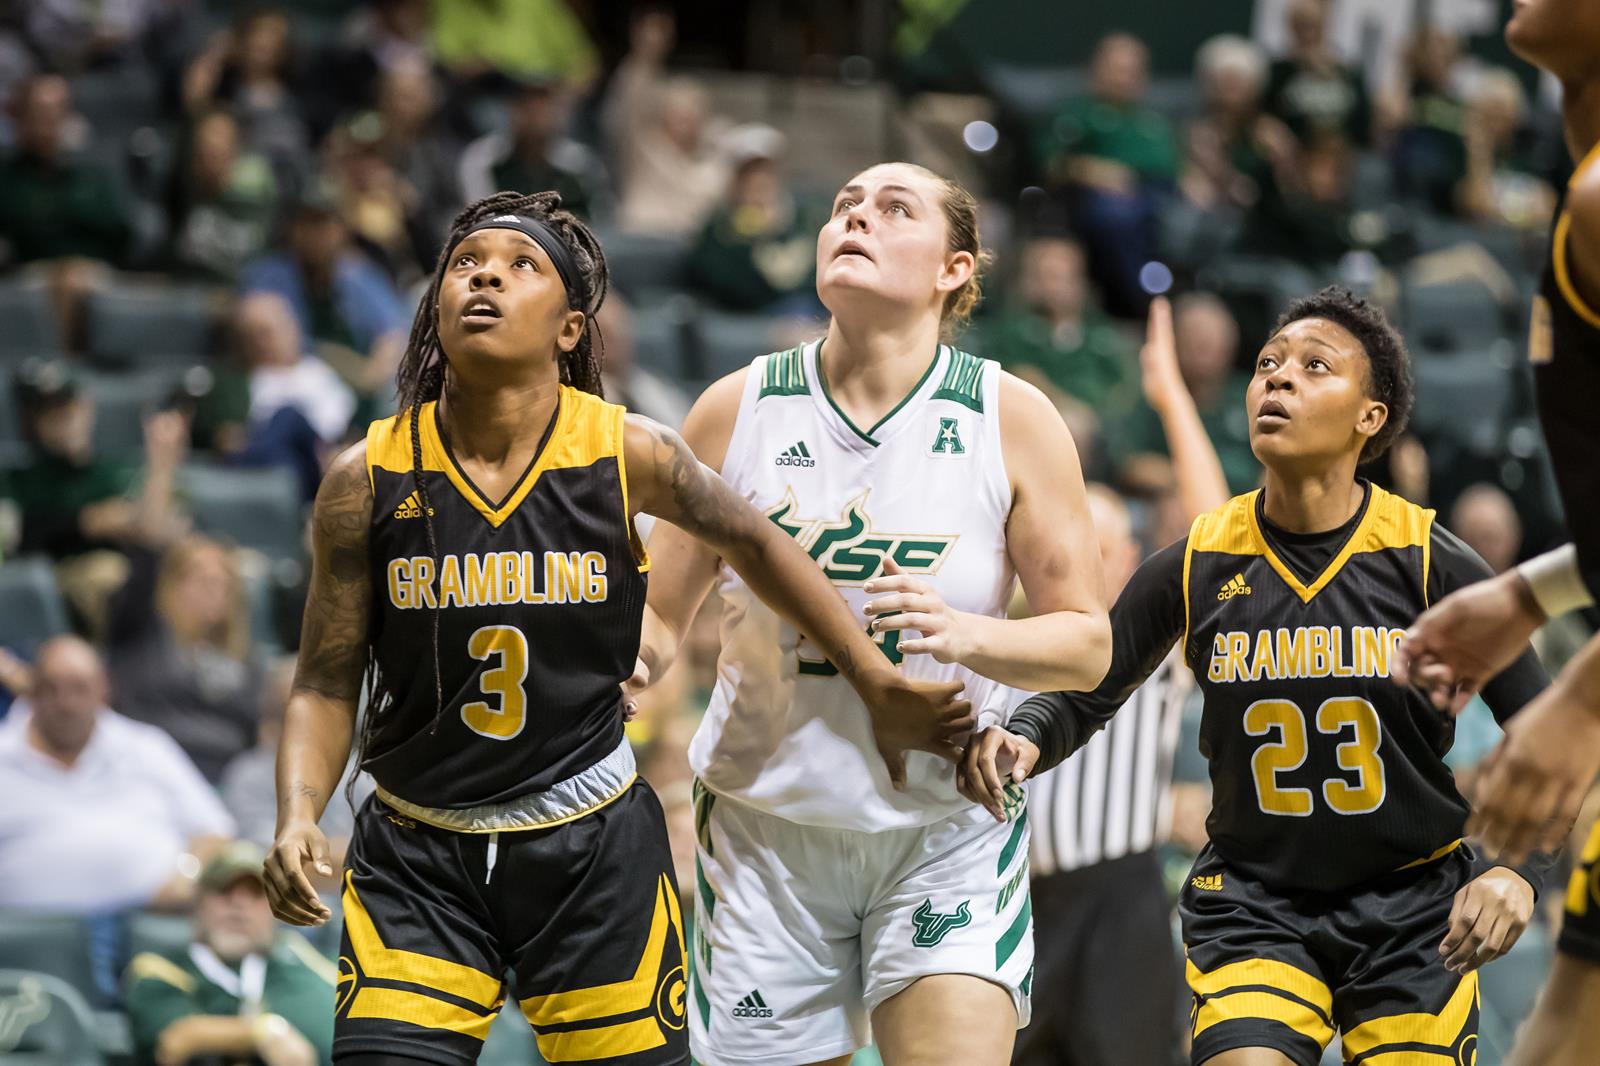 grambling-state-makes-history-with-record-breaking-win-in-womens-college-basketball